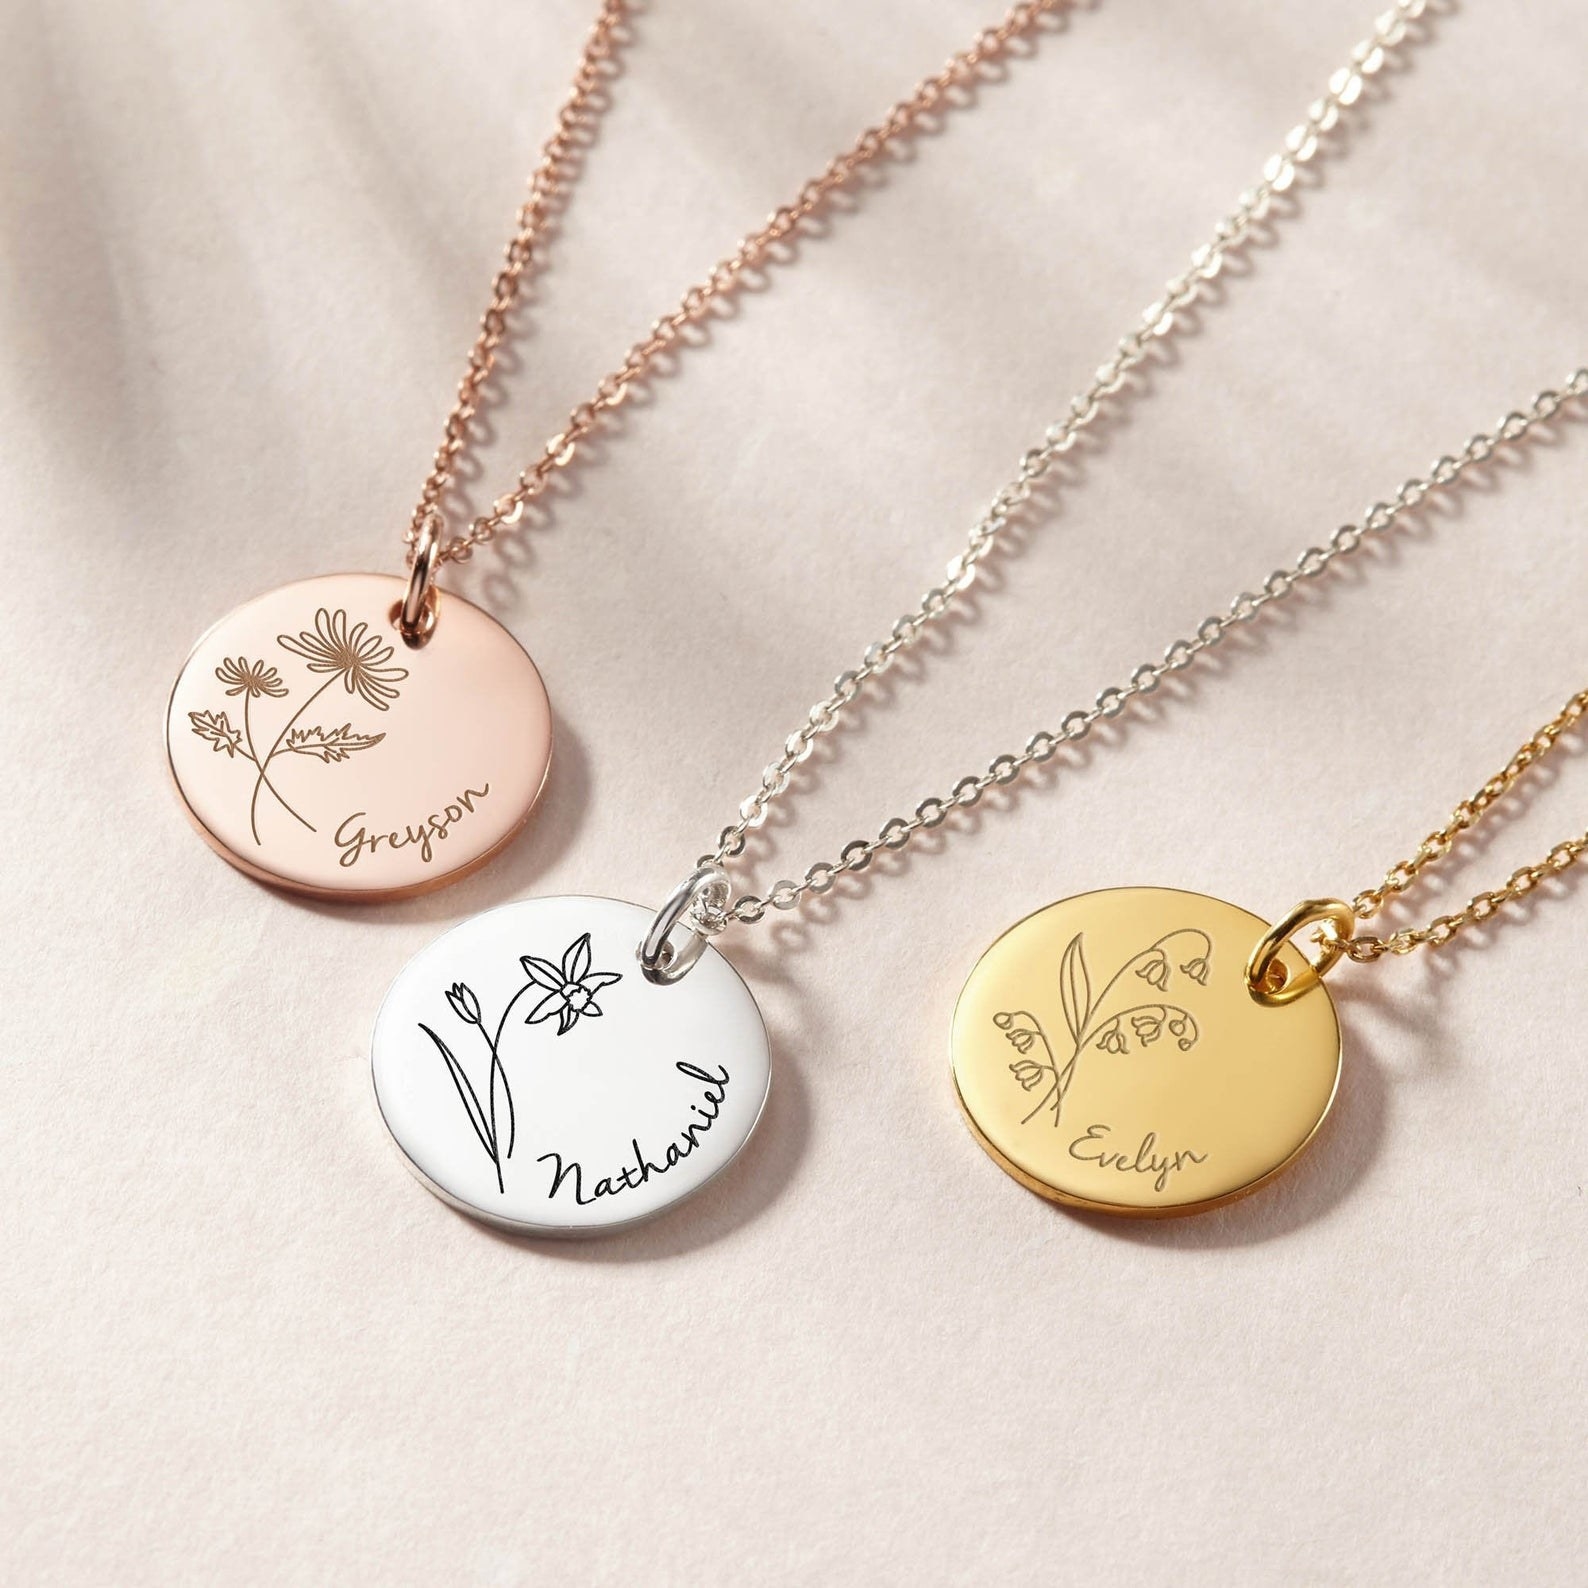 three necklaces with circular charms on them with flowers and a name etched into them